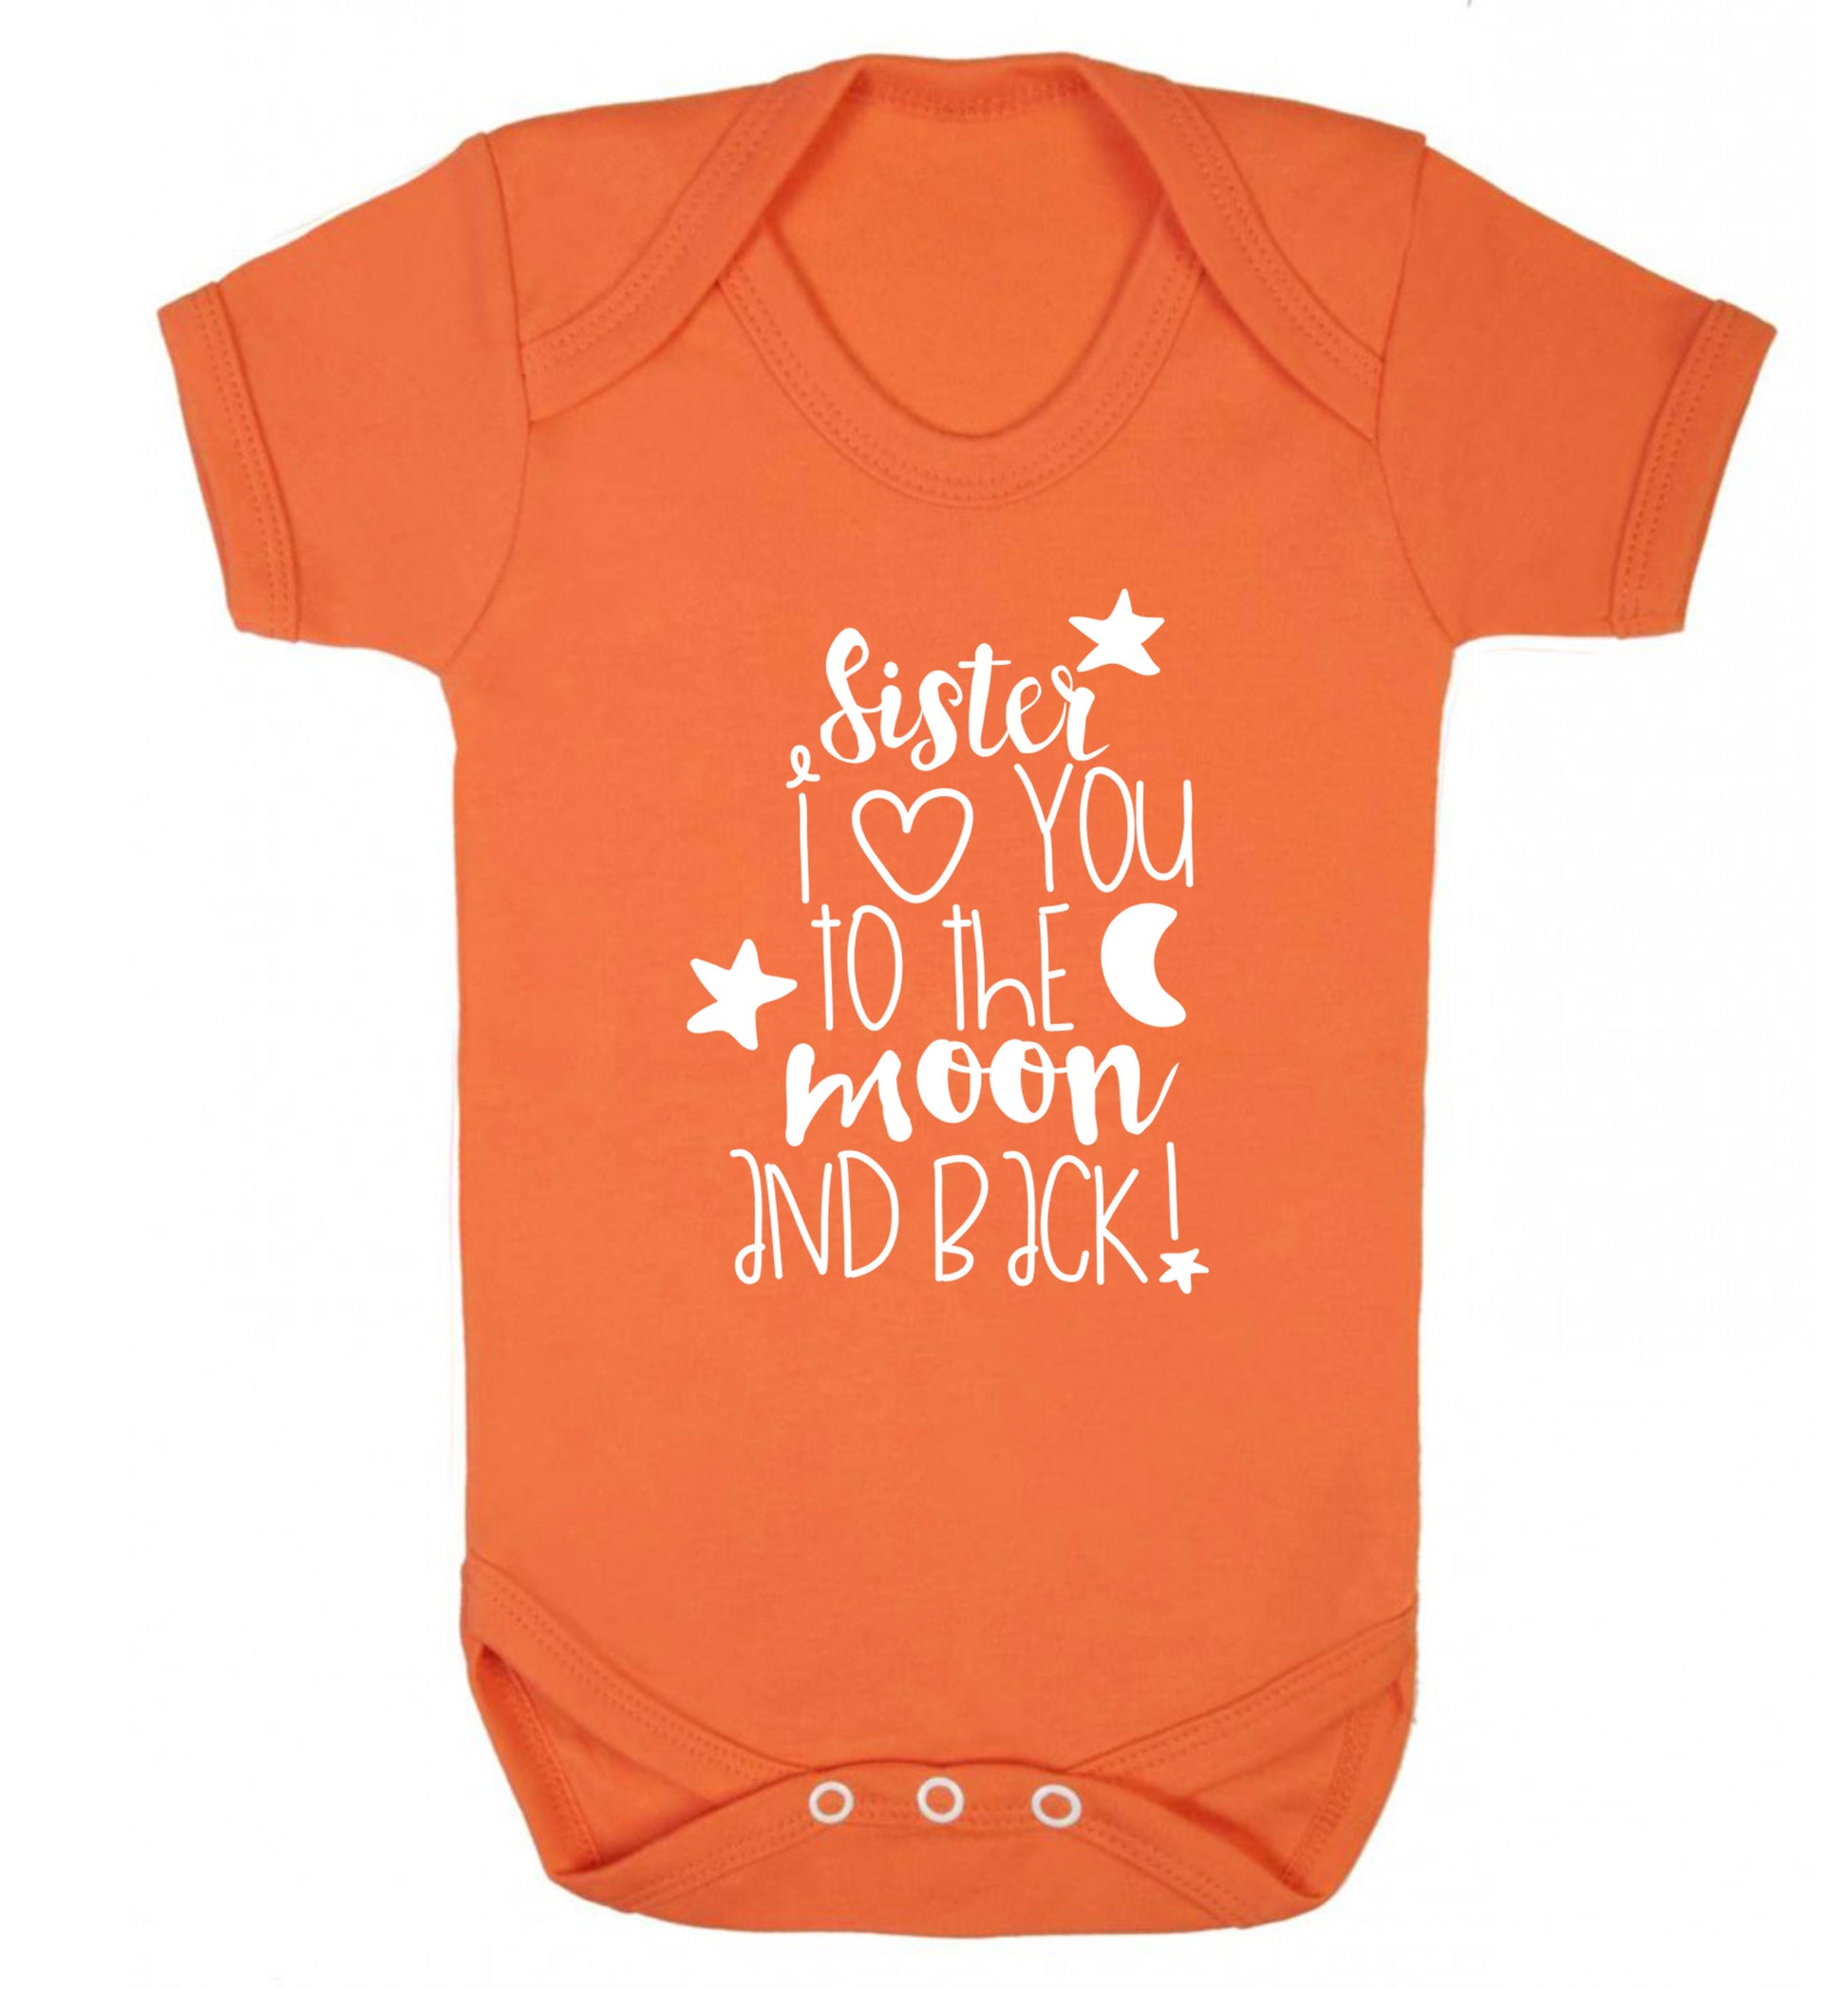 Sister I love you to the moon and back Baby Vest orange 18-24 months